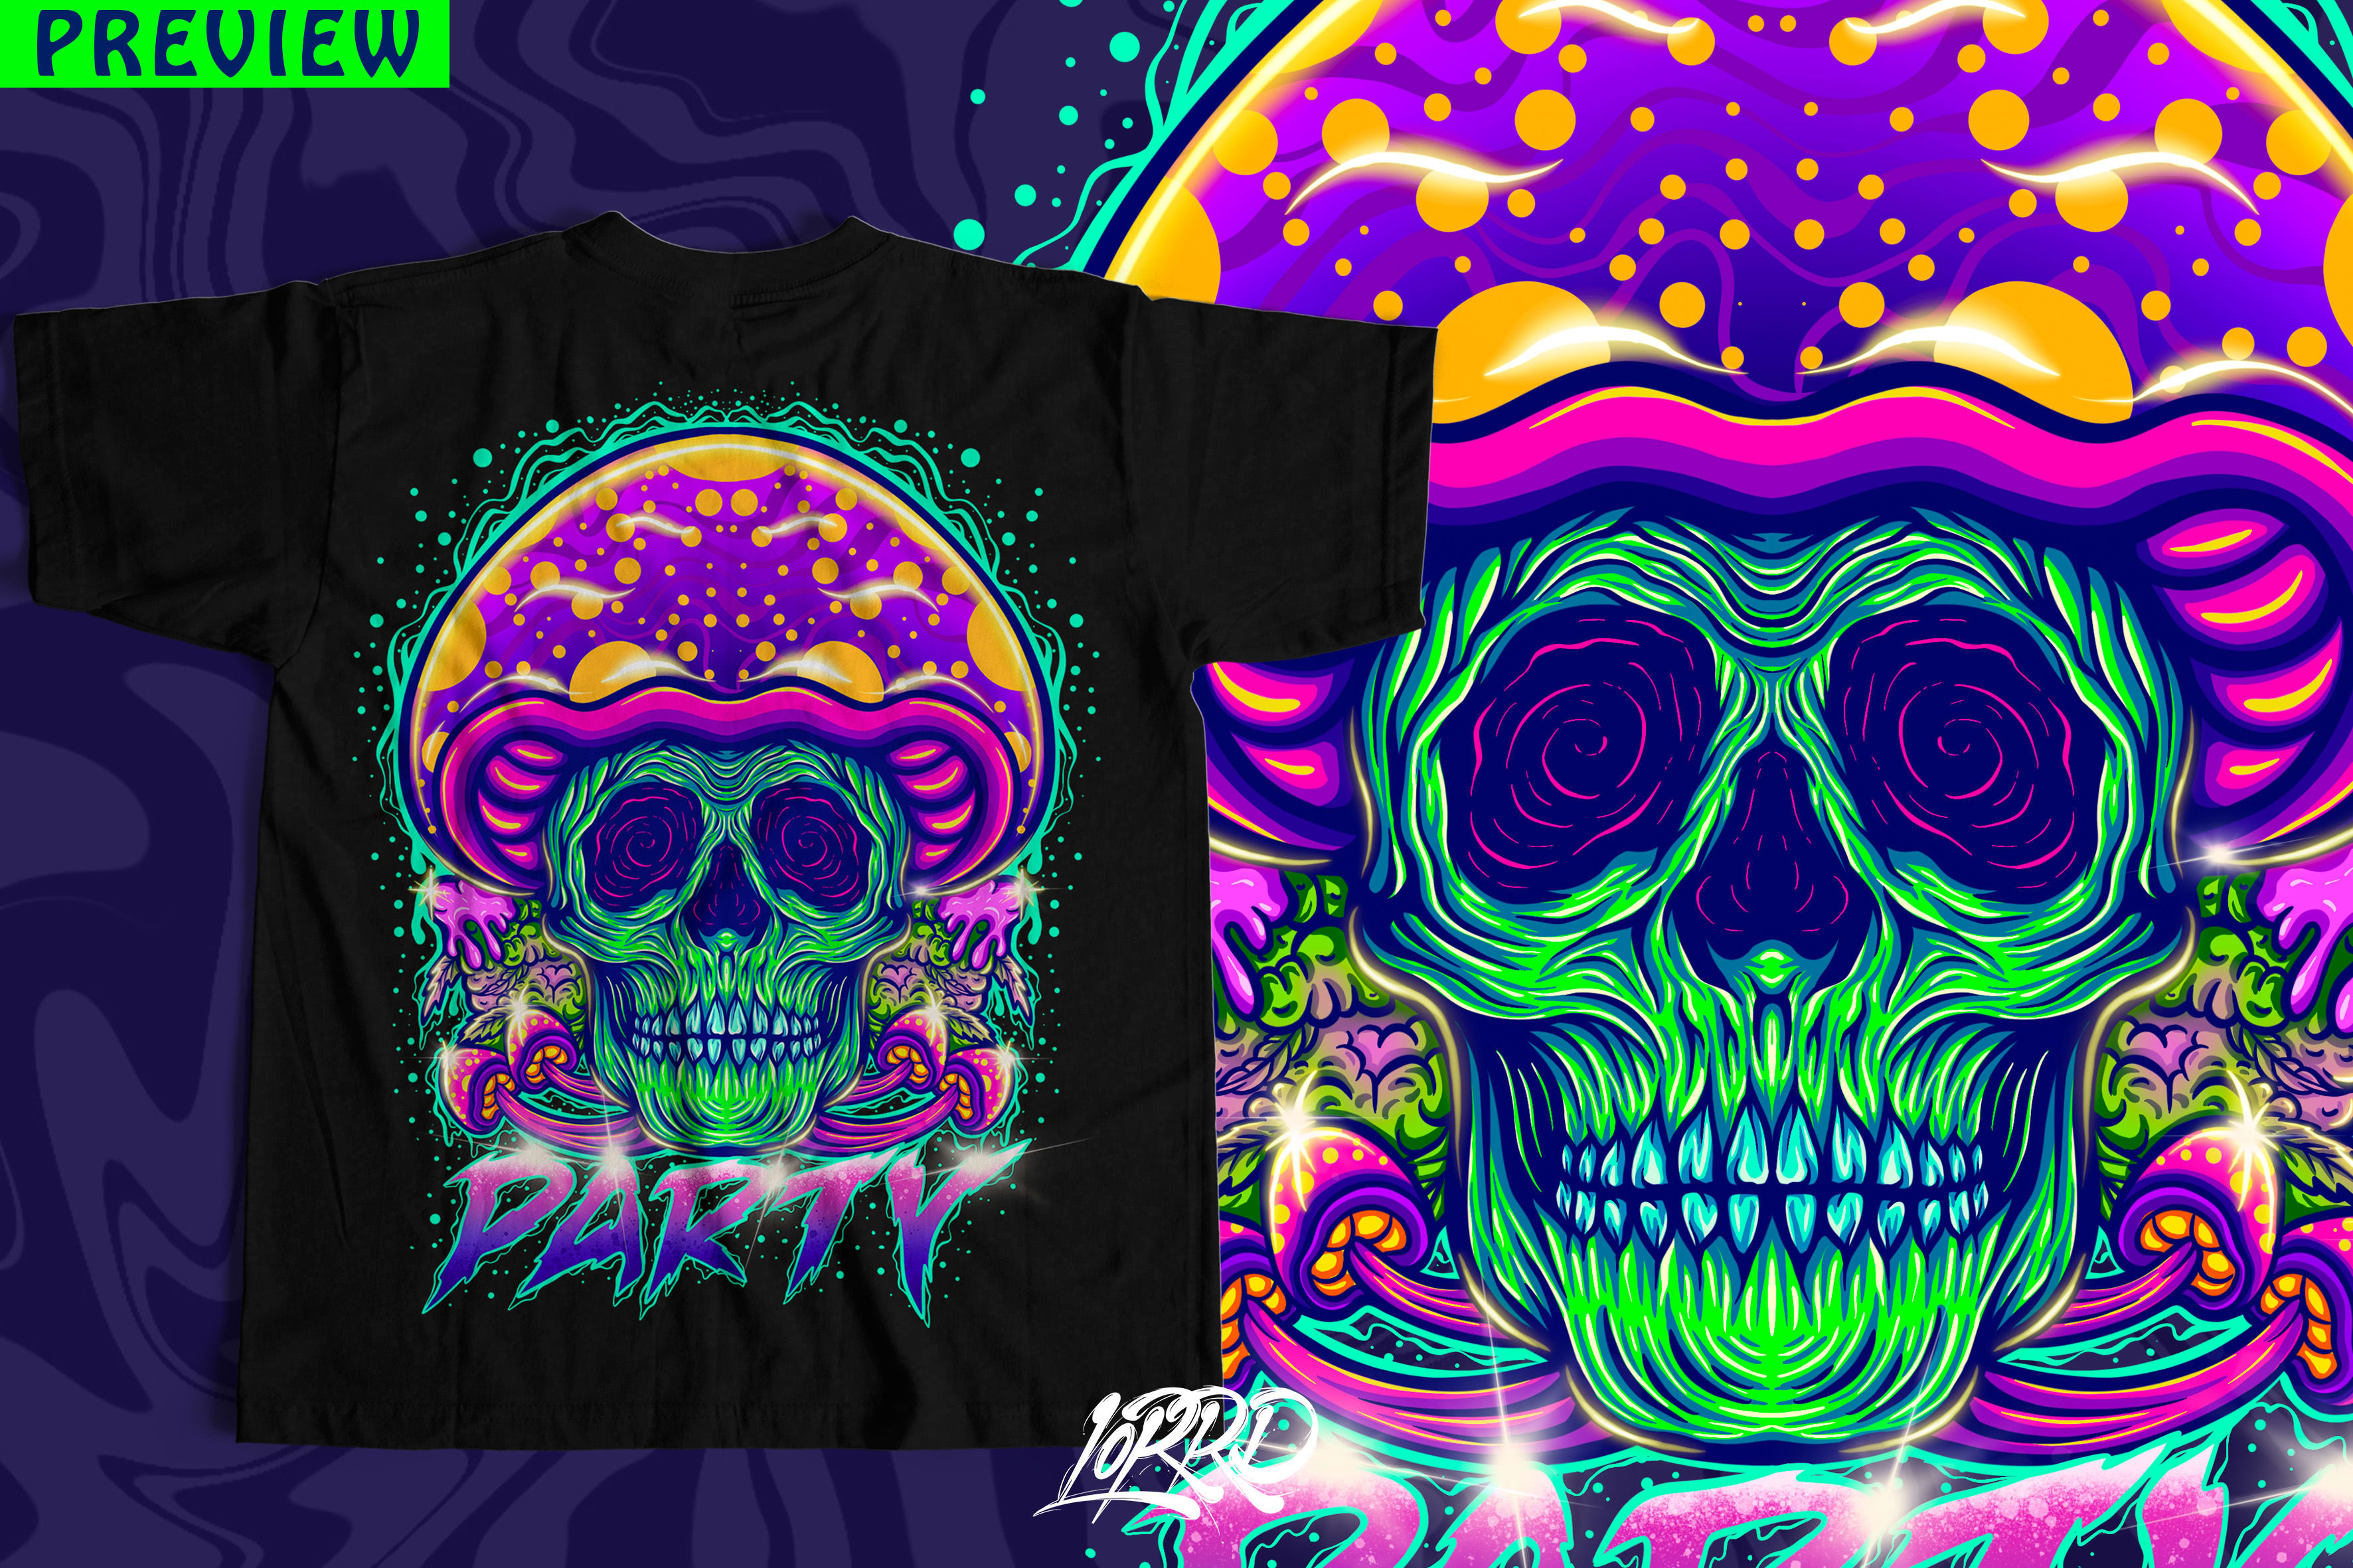 NOICE! T-Shirt with Trippy 3D Effects